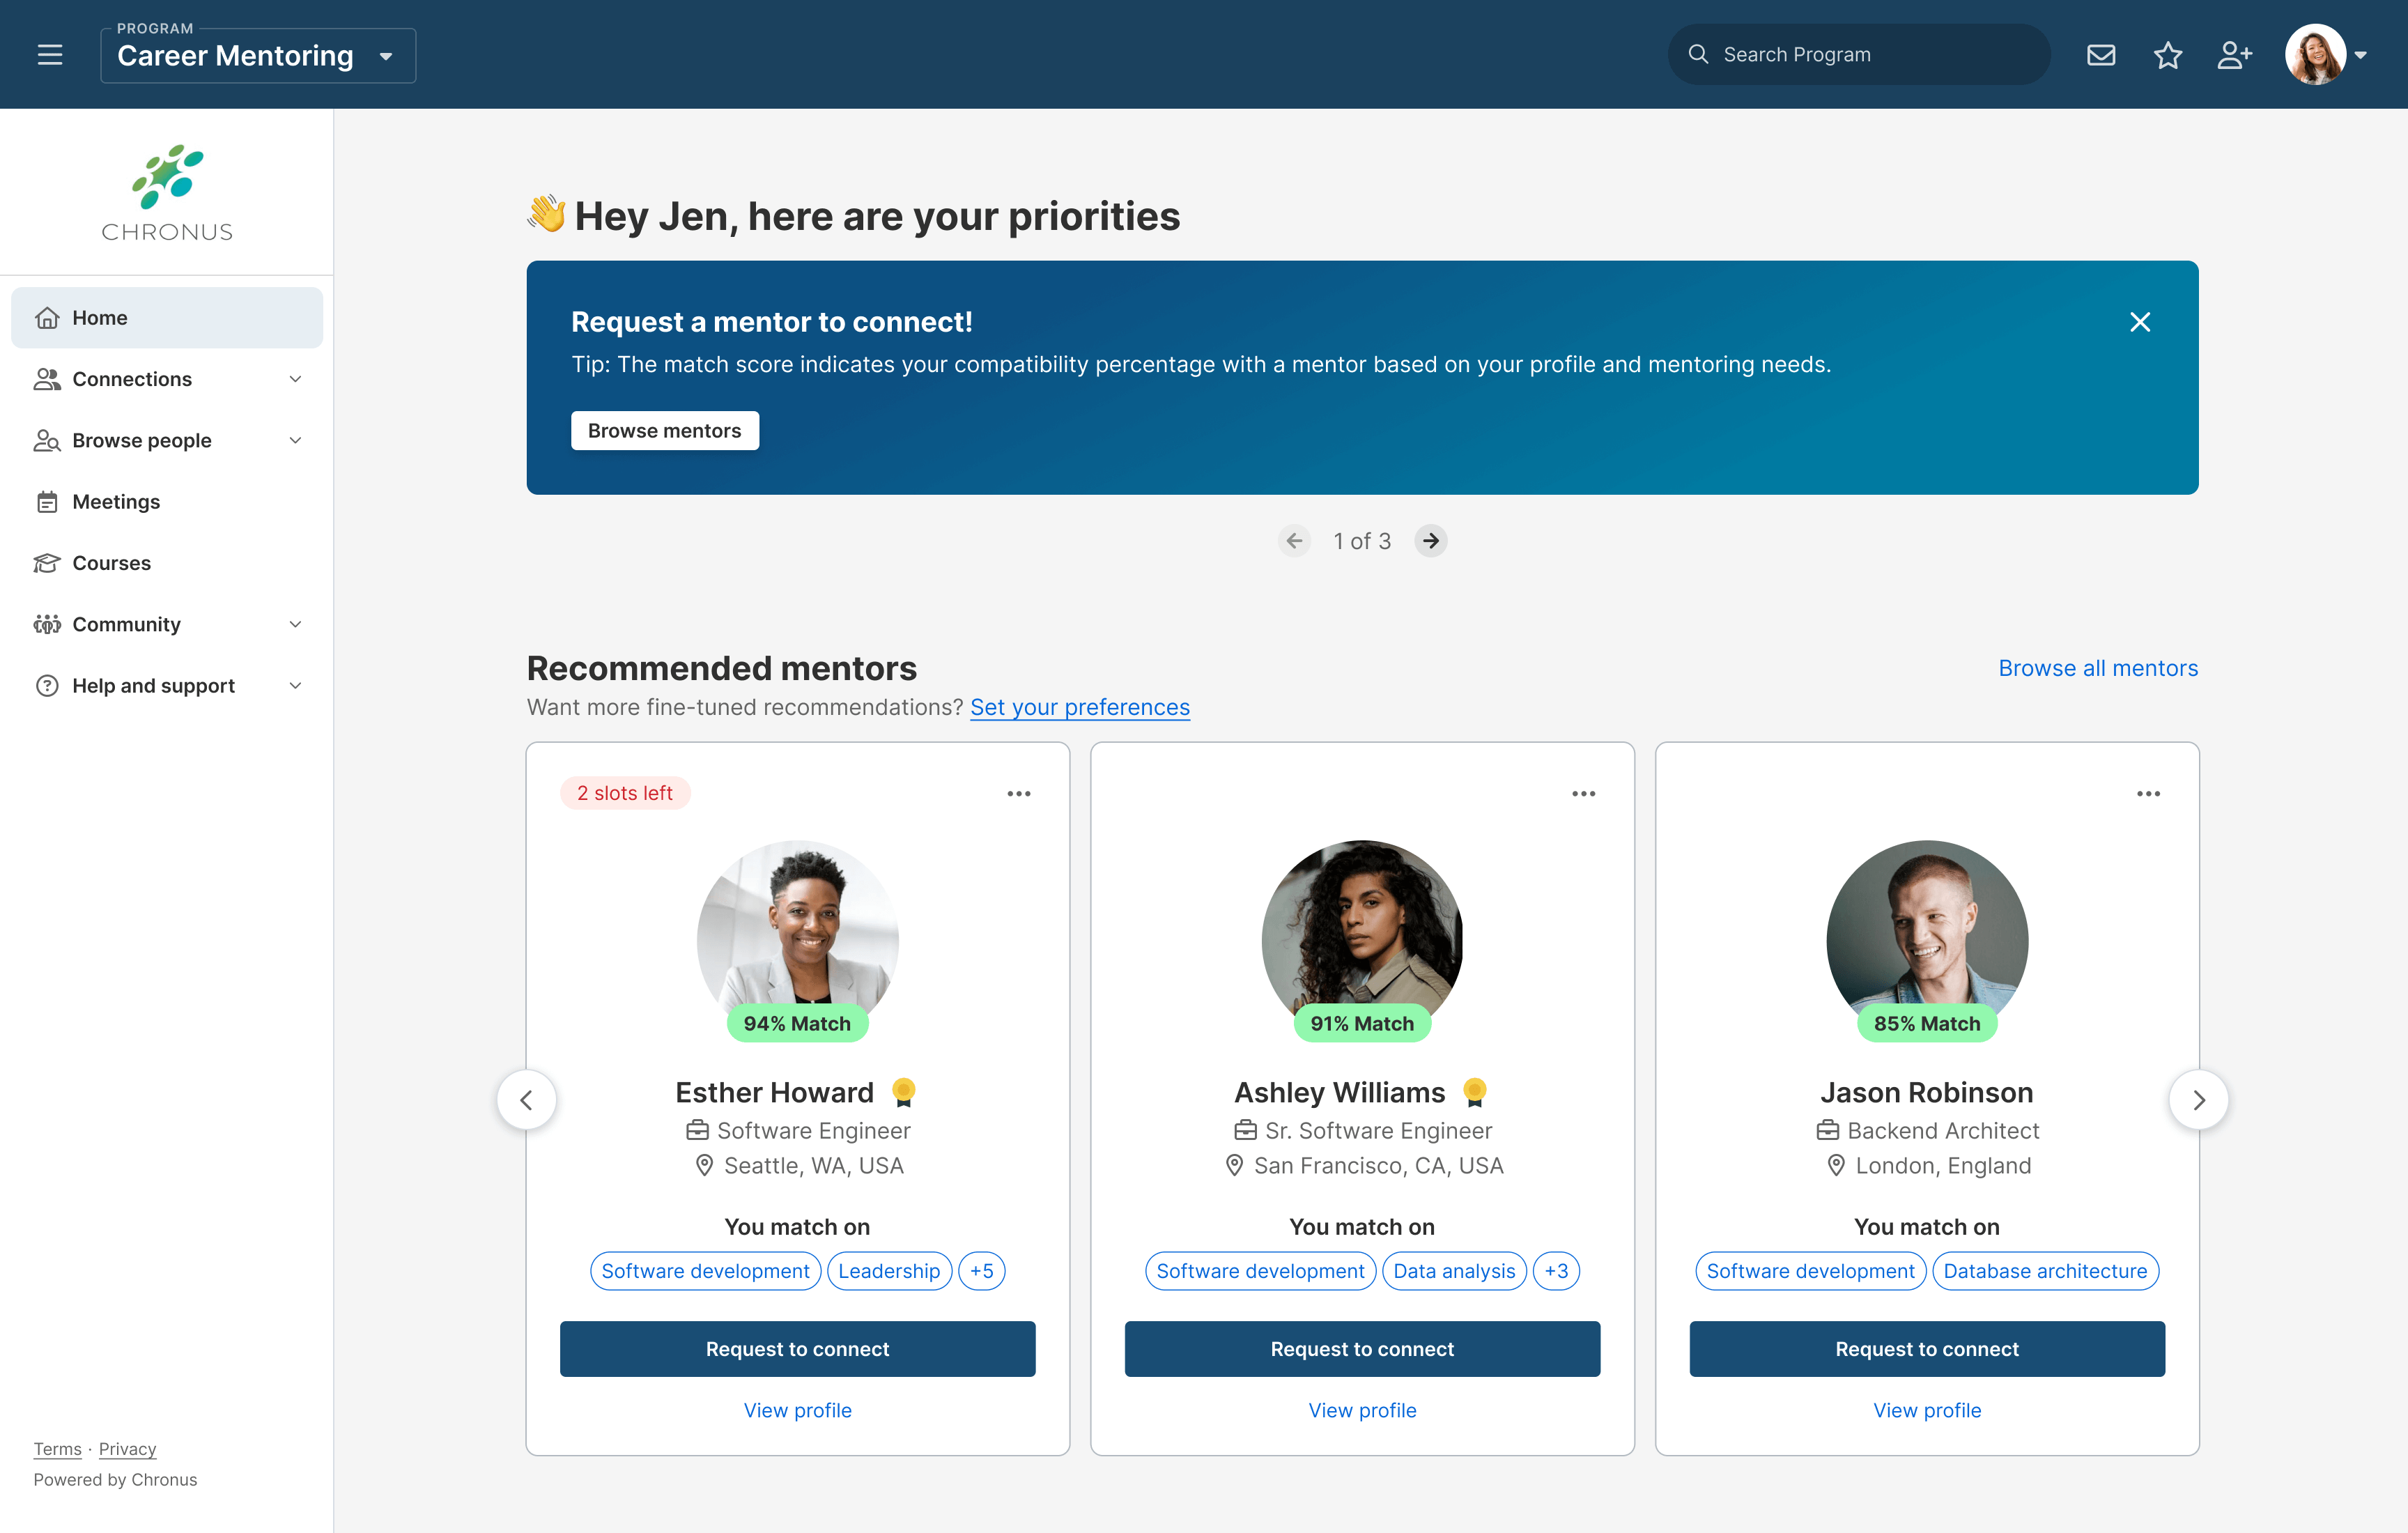 Chronus mentoring homepage showcasing mentor recommendations based on the similar knowledge, skill and interests as determined by the matching algorithm. The recommendations show three mentor options (2 women and 1 man).